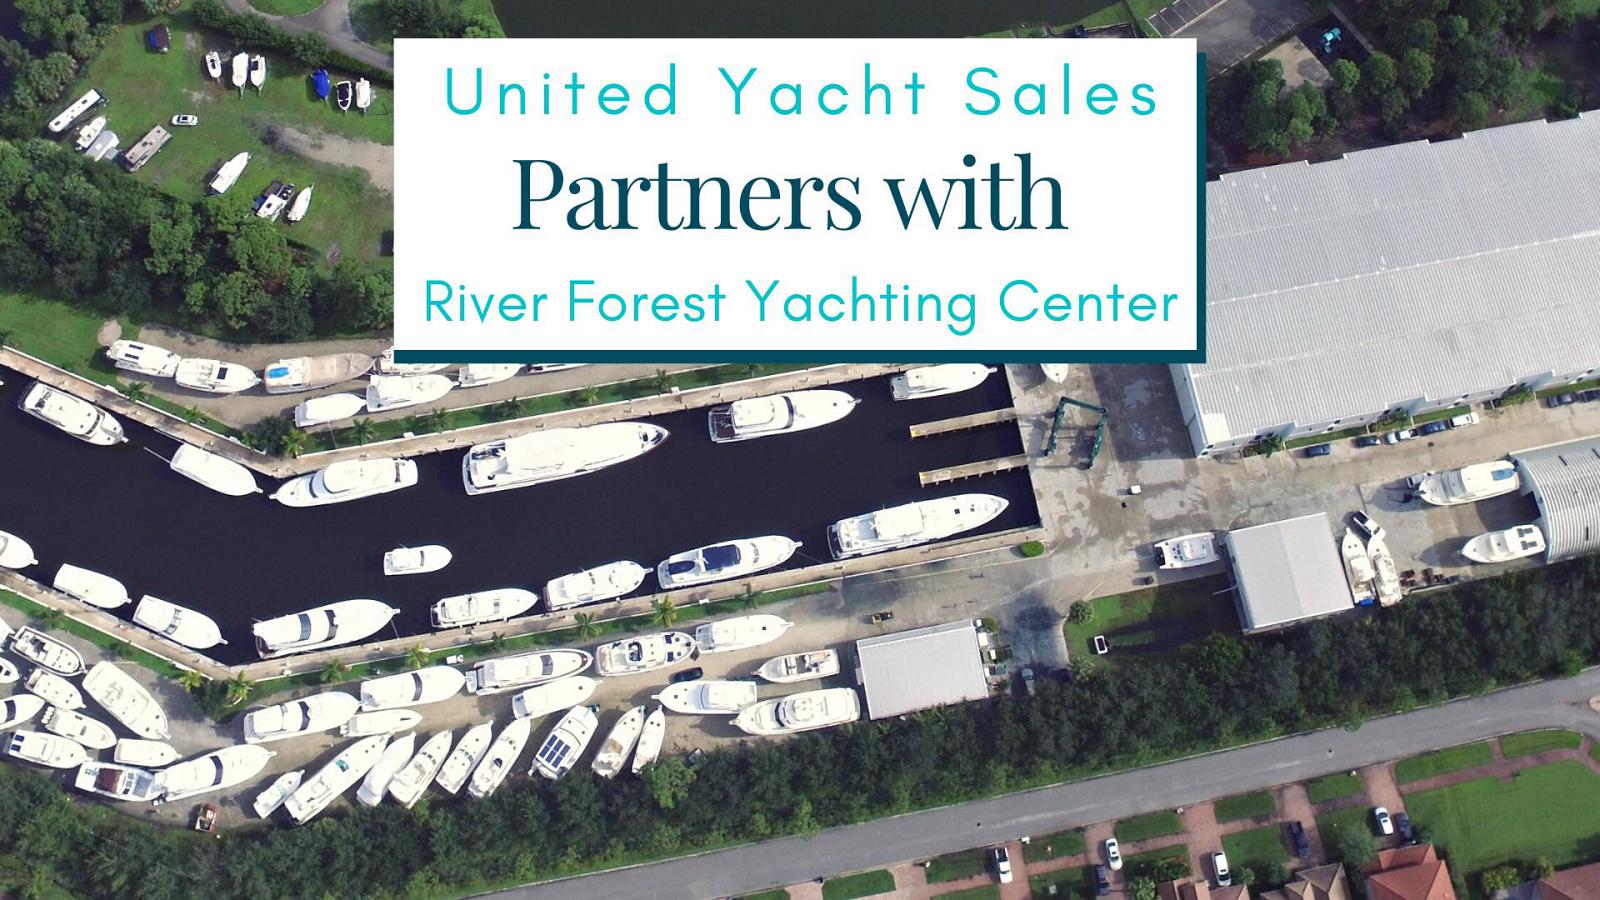 photo of United Yacht Sales Partners With River Forest Yachting Centers